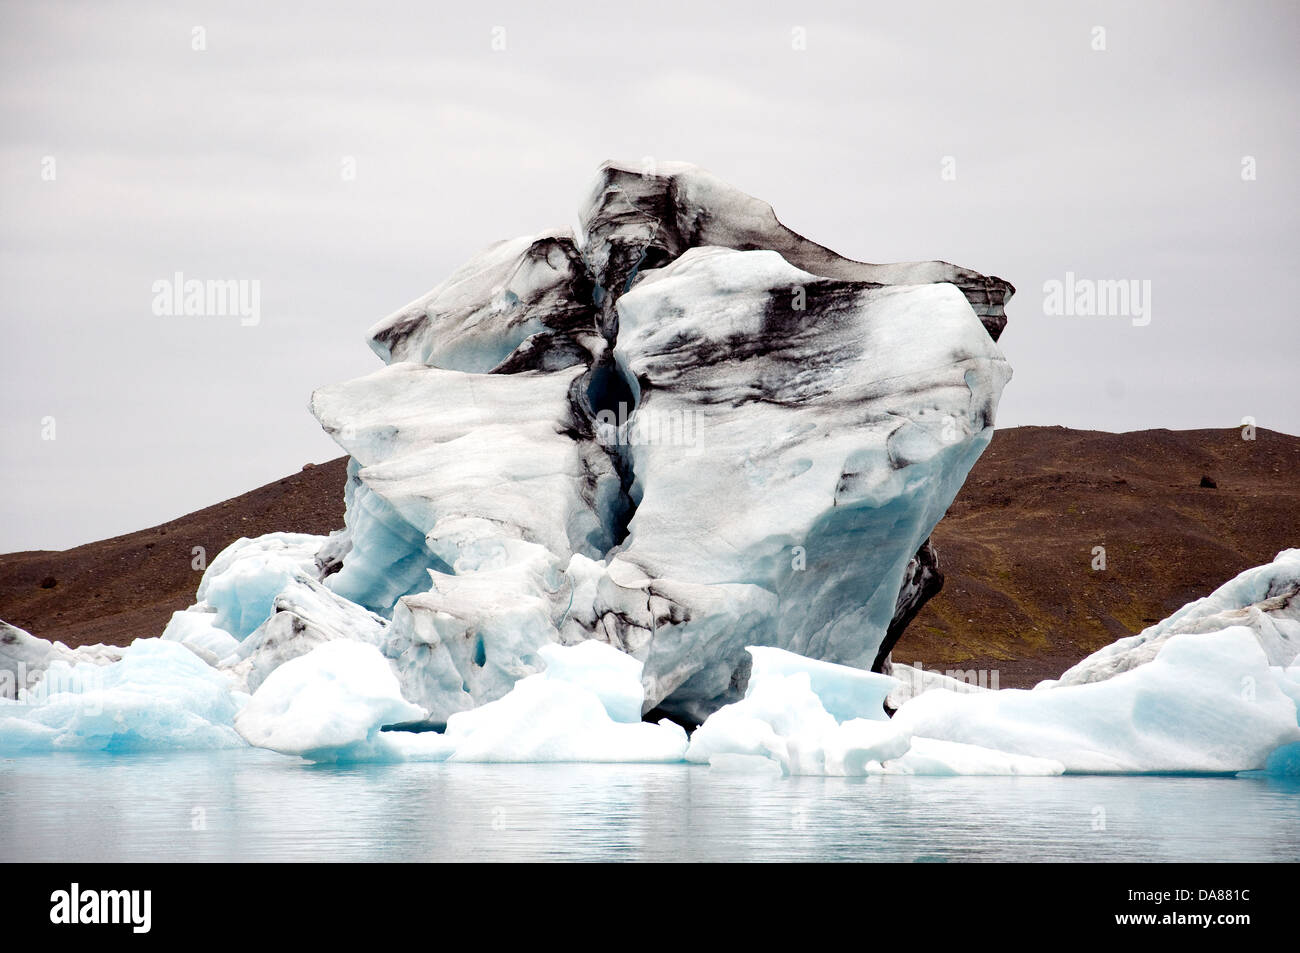 A quirk of nature places a black-topped iceberg among other bergs in Iceland's Jokulsarlon glacier lagoon Stock Photo